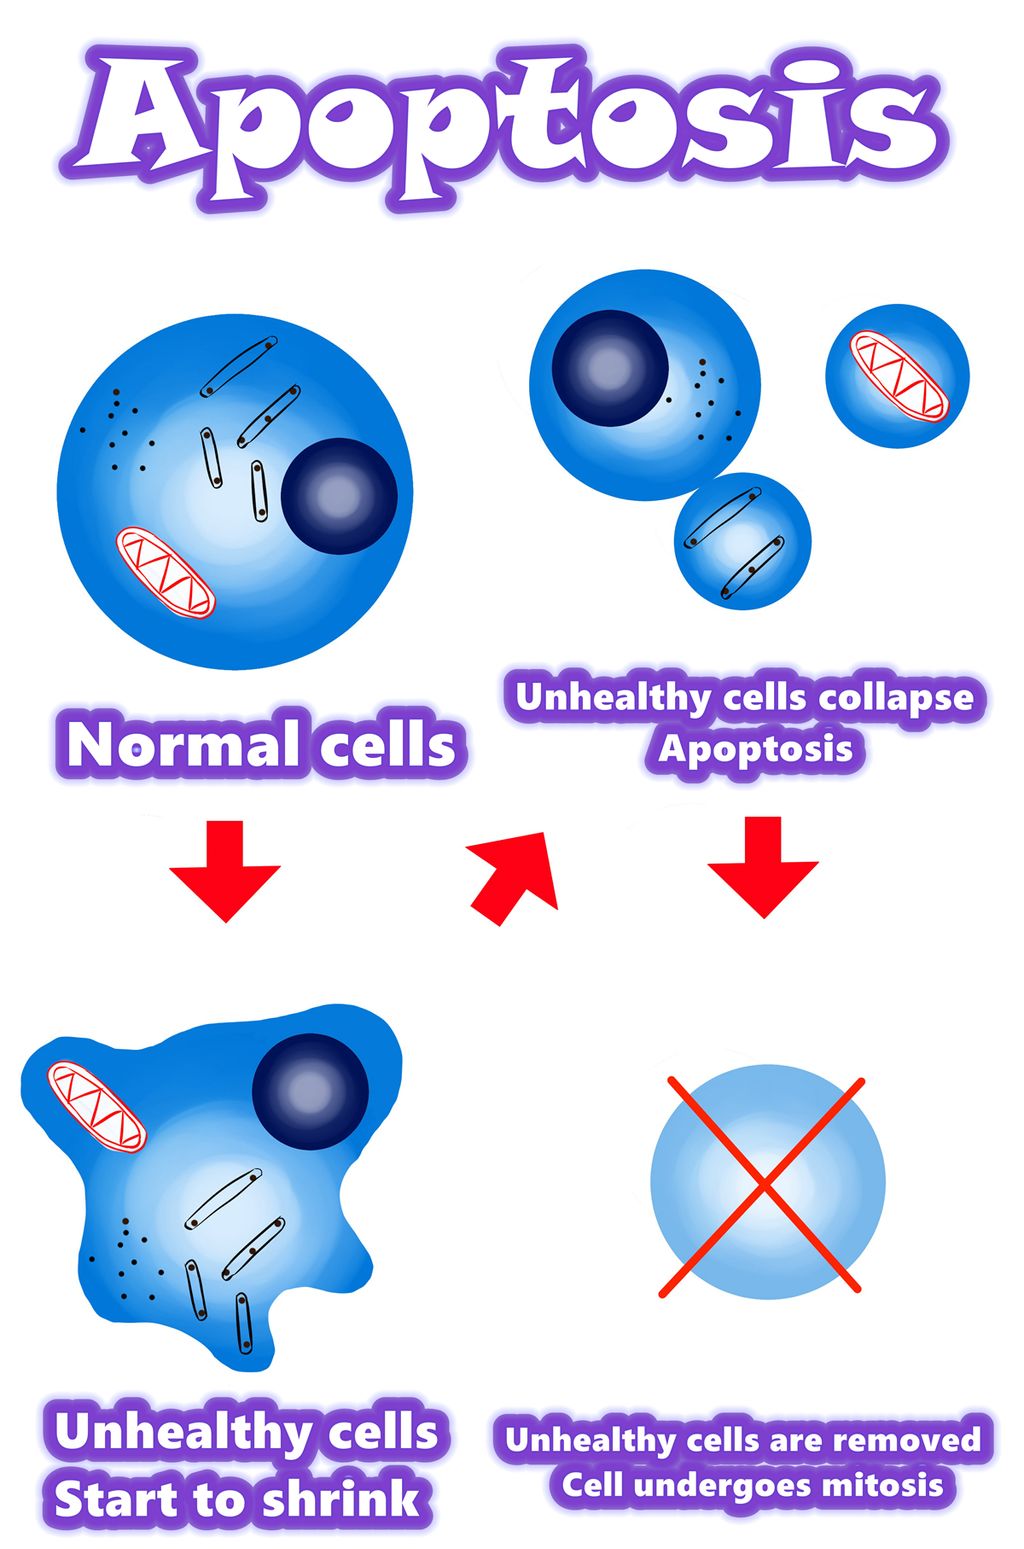 Solamargine | The best solution for cancer cells. | Apoptosis vs Cancer cells | Apoptosis vs Abnormal cells | Apoptosis vs Mutant cells | Overview / Summary / Mechanism of apoptosis